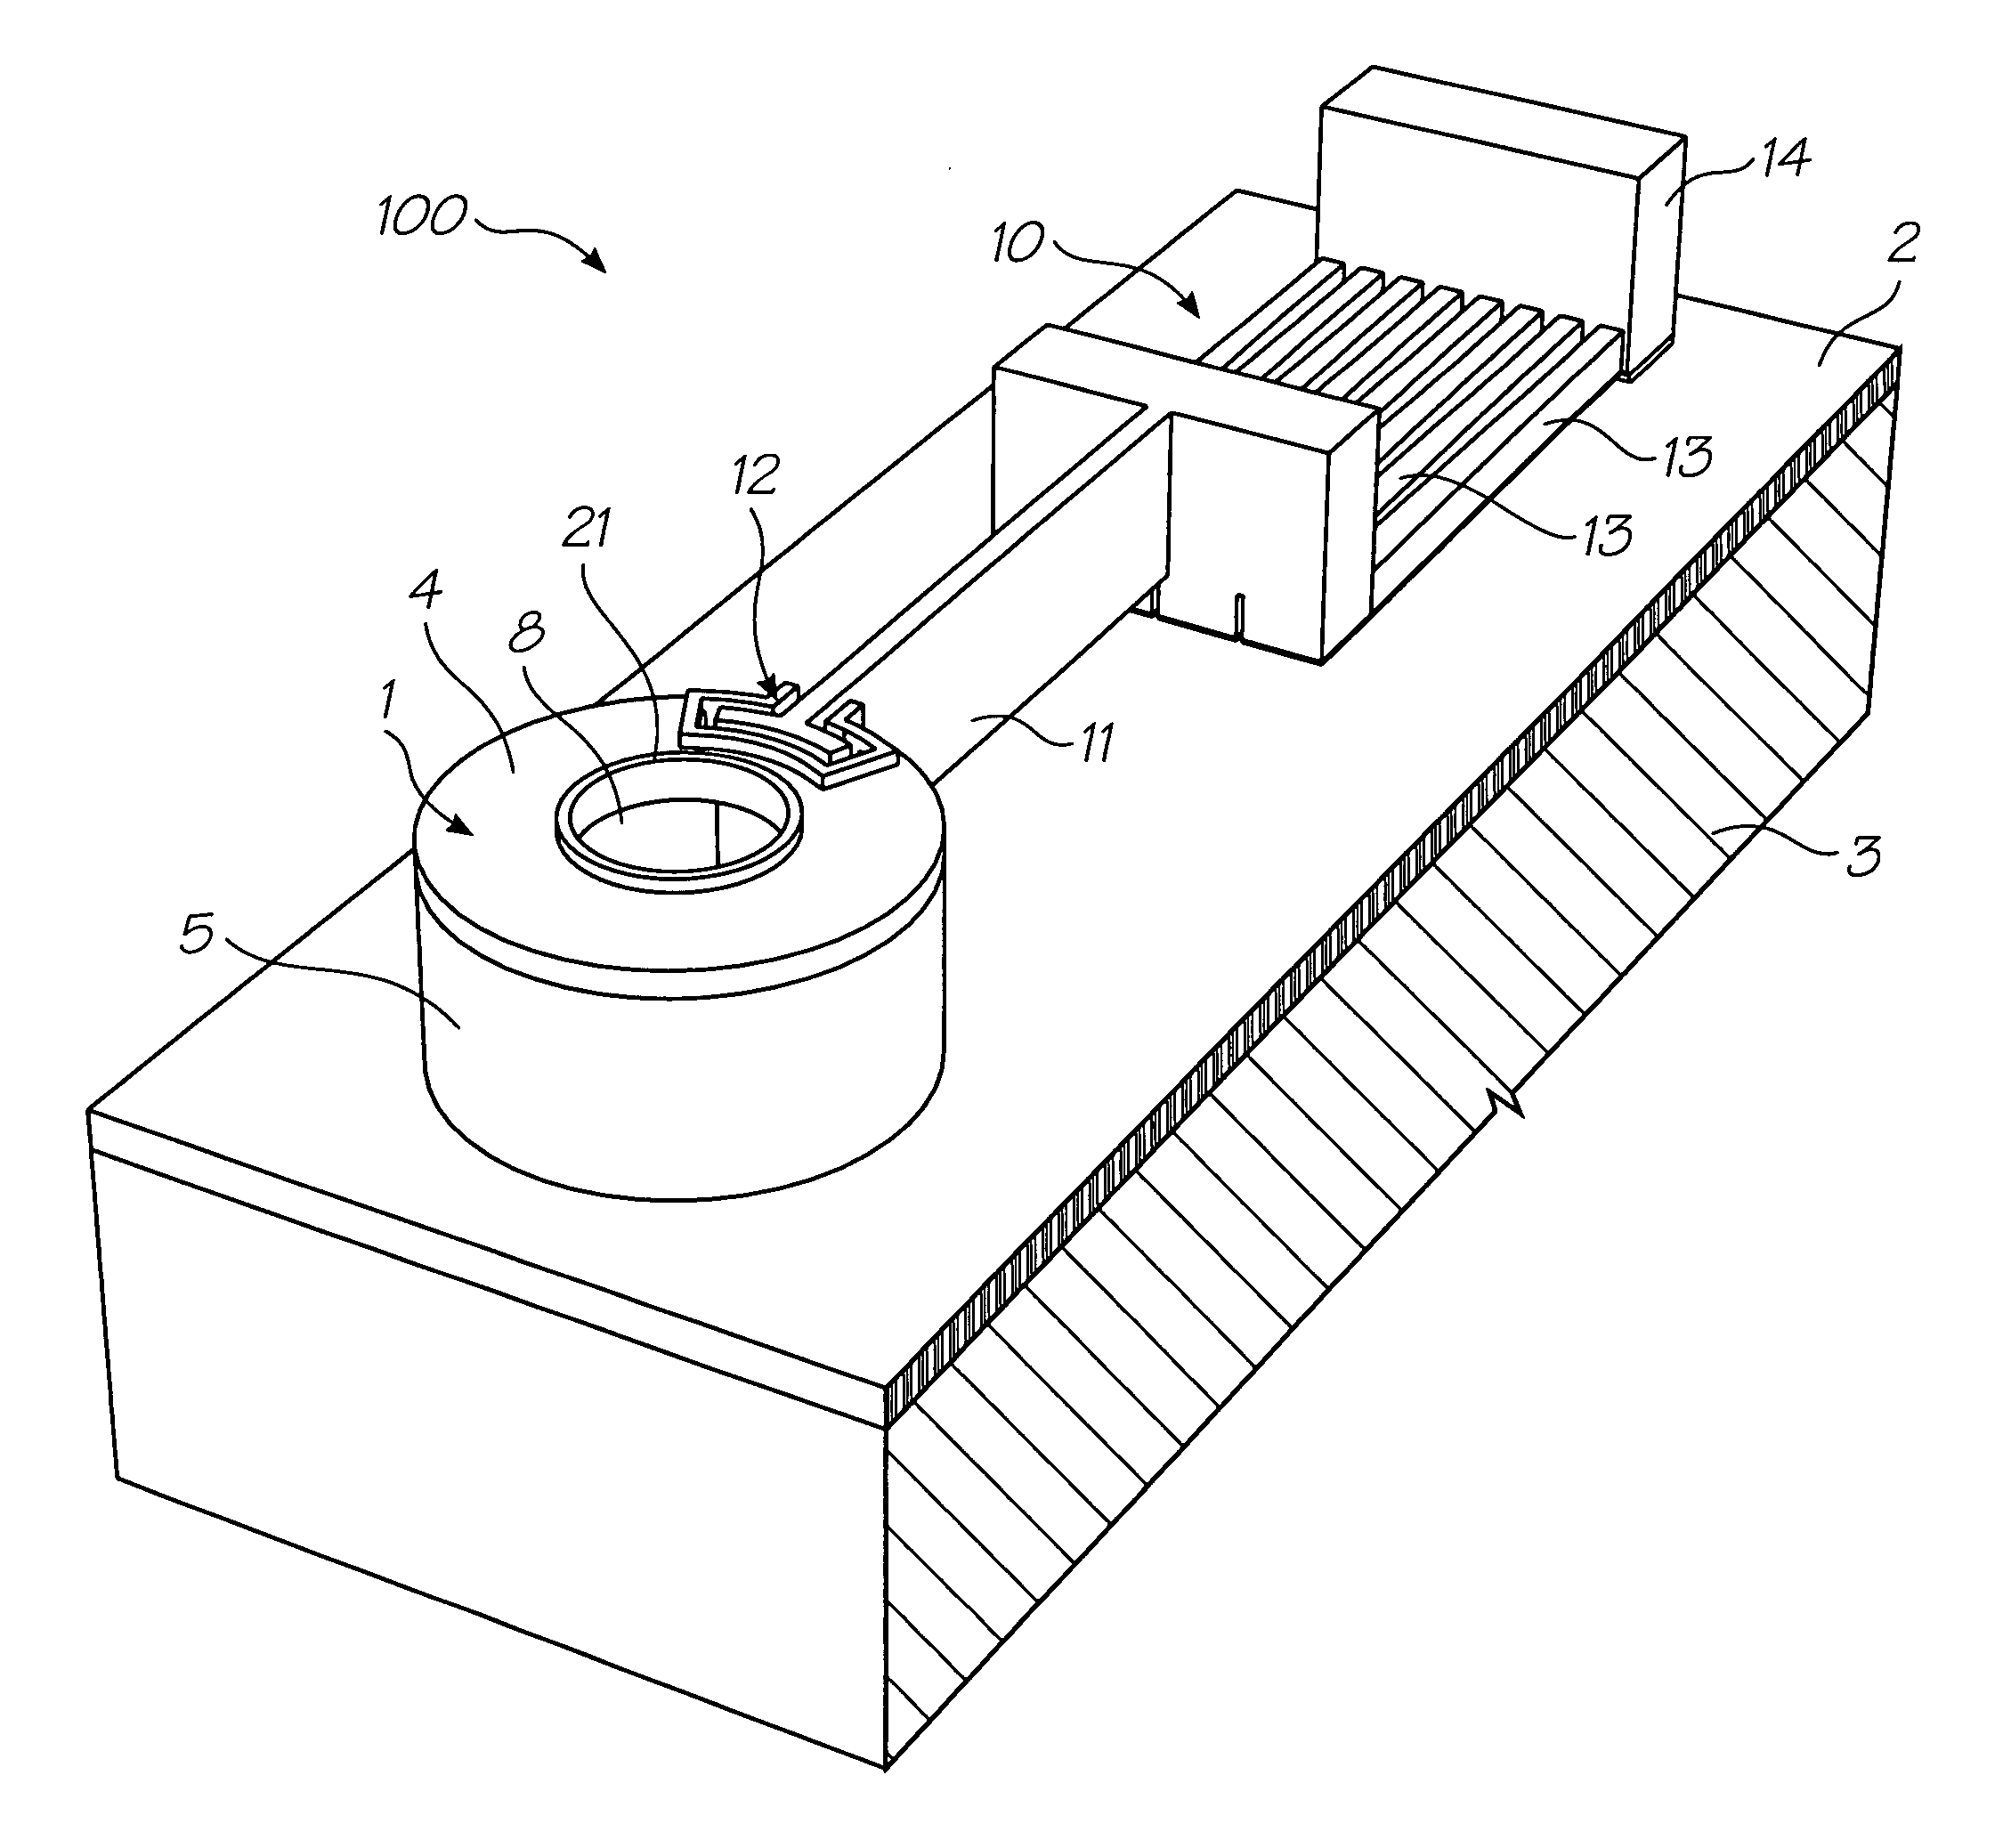 Inkjet nozzle assembly having thermal bend actuator with an active beam defining part of an exterior surface of a nozzle chamber roof